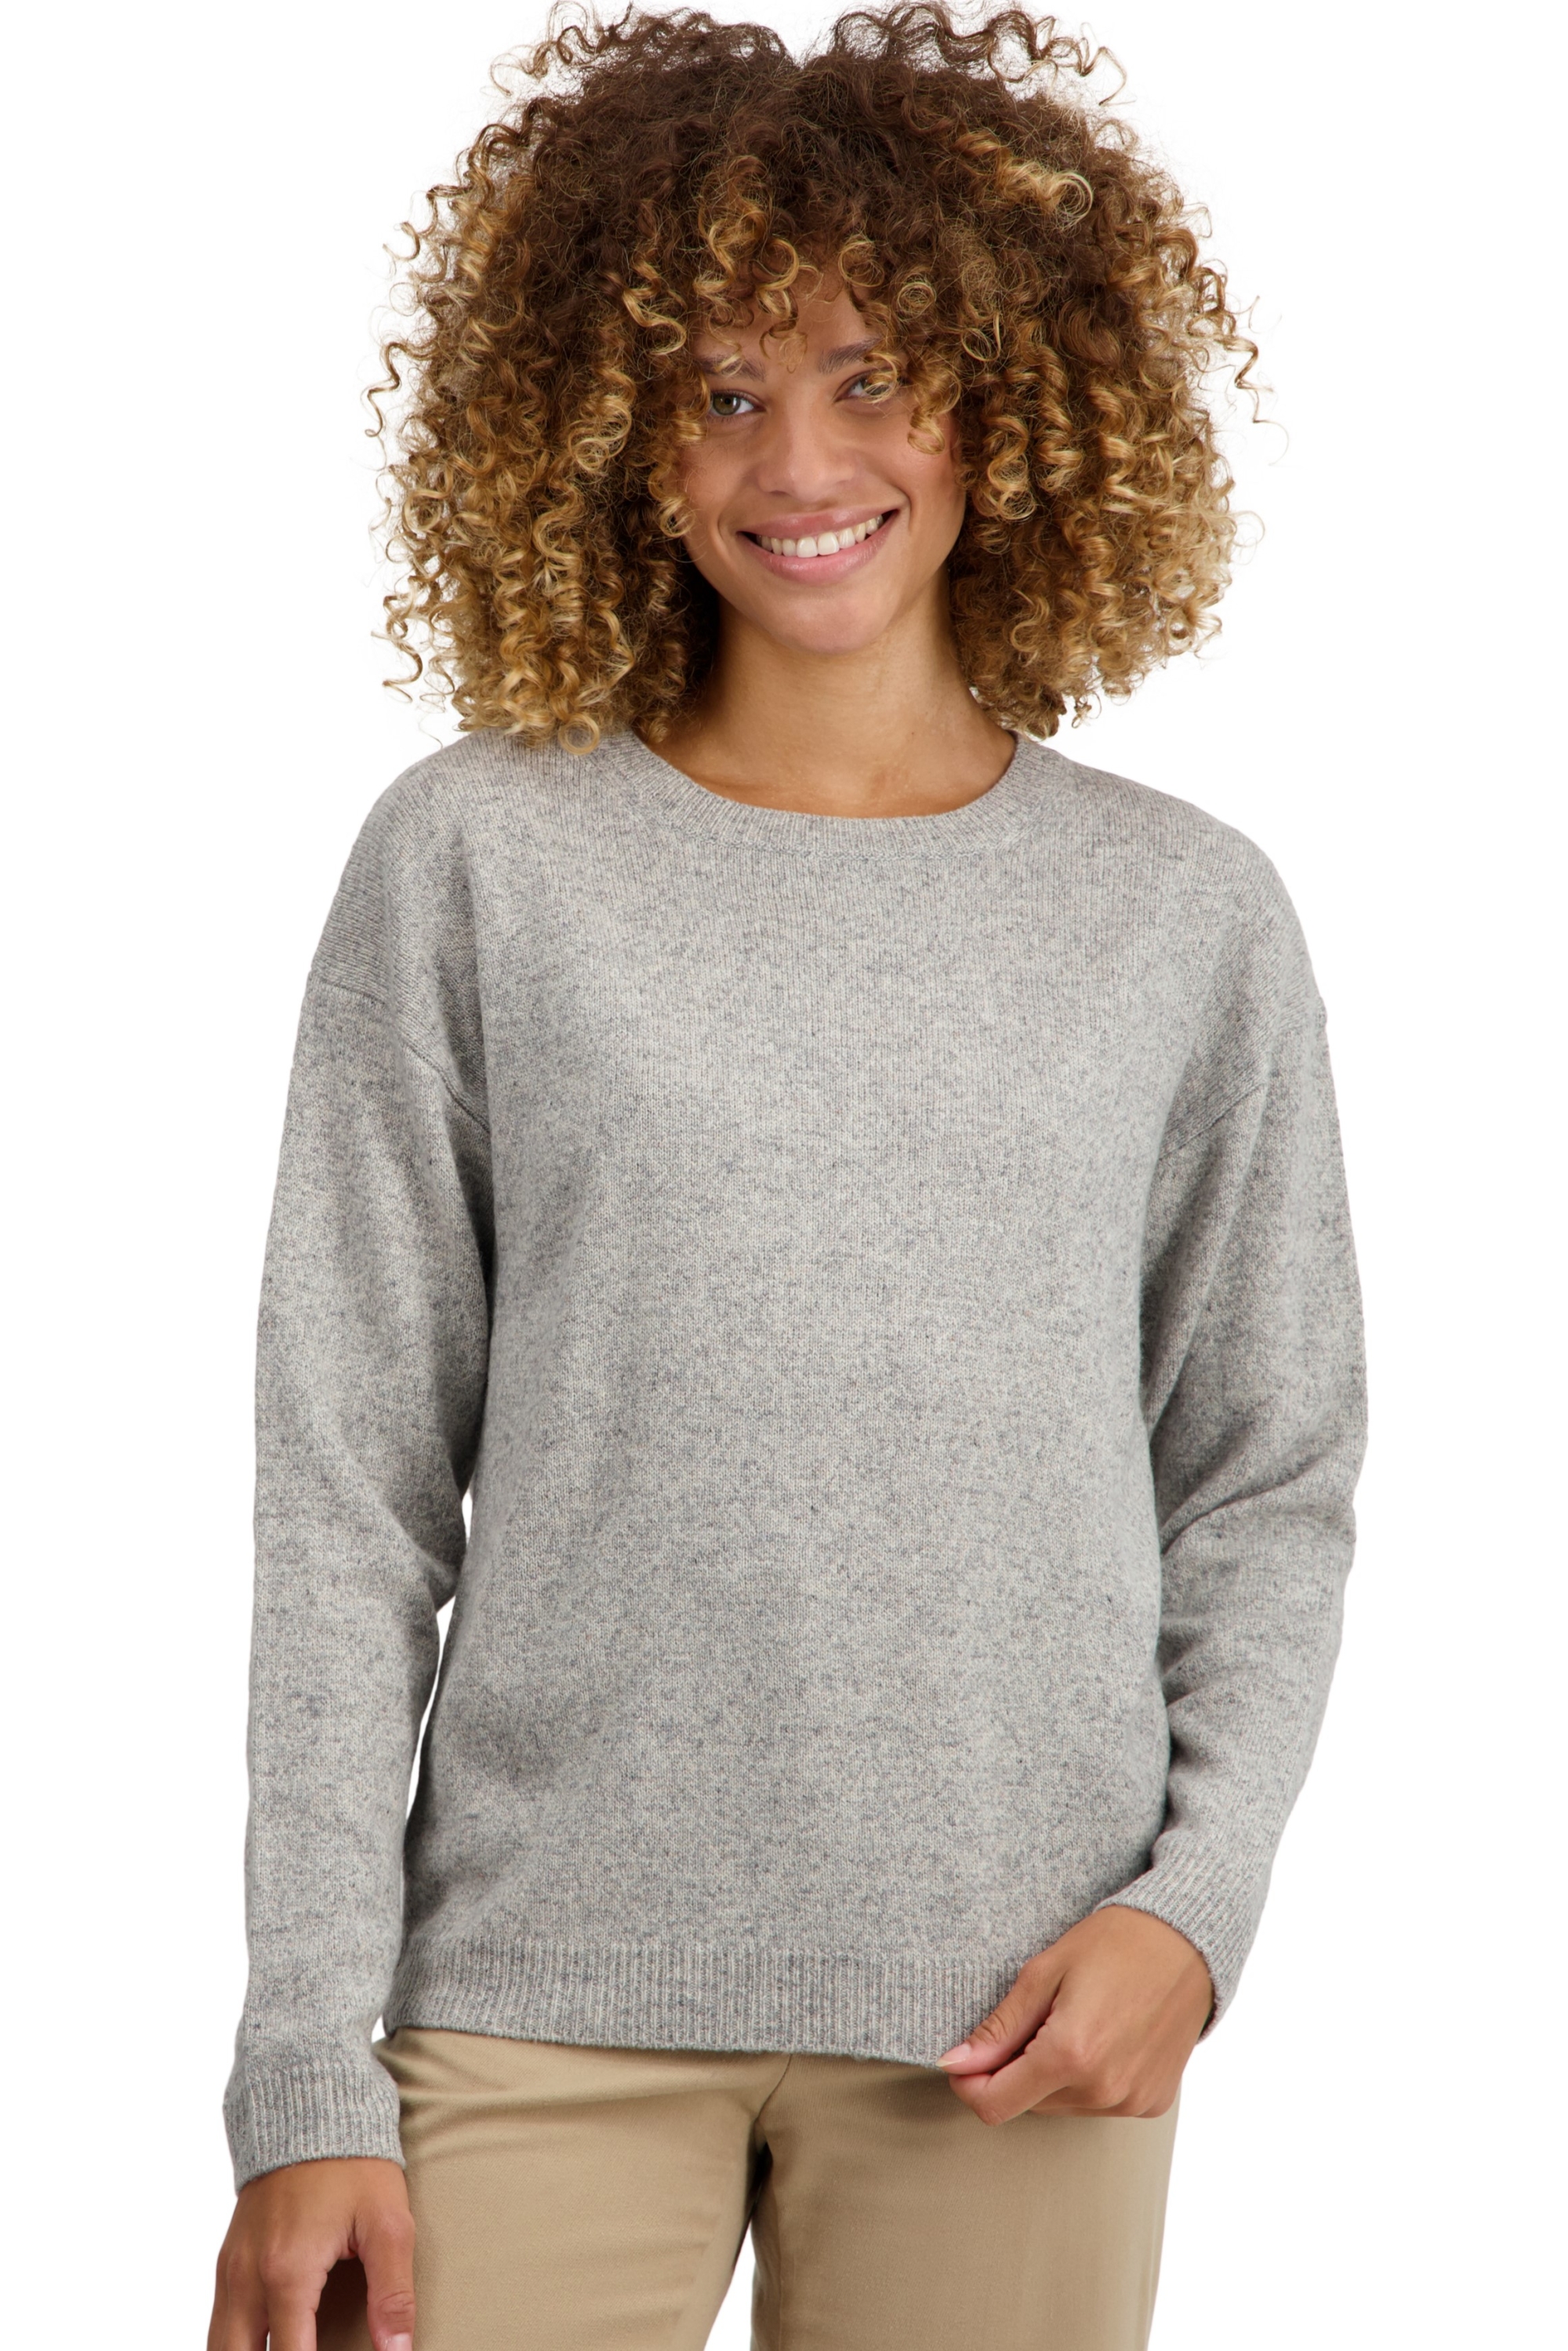 Chameau pull femme col rond thelma pierre 4xl